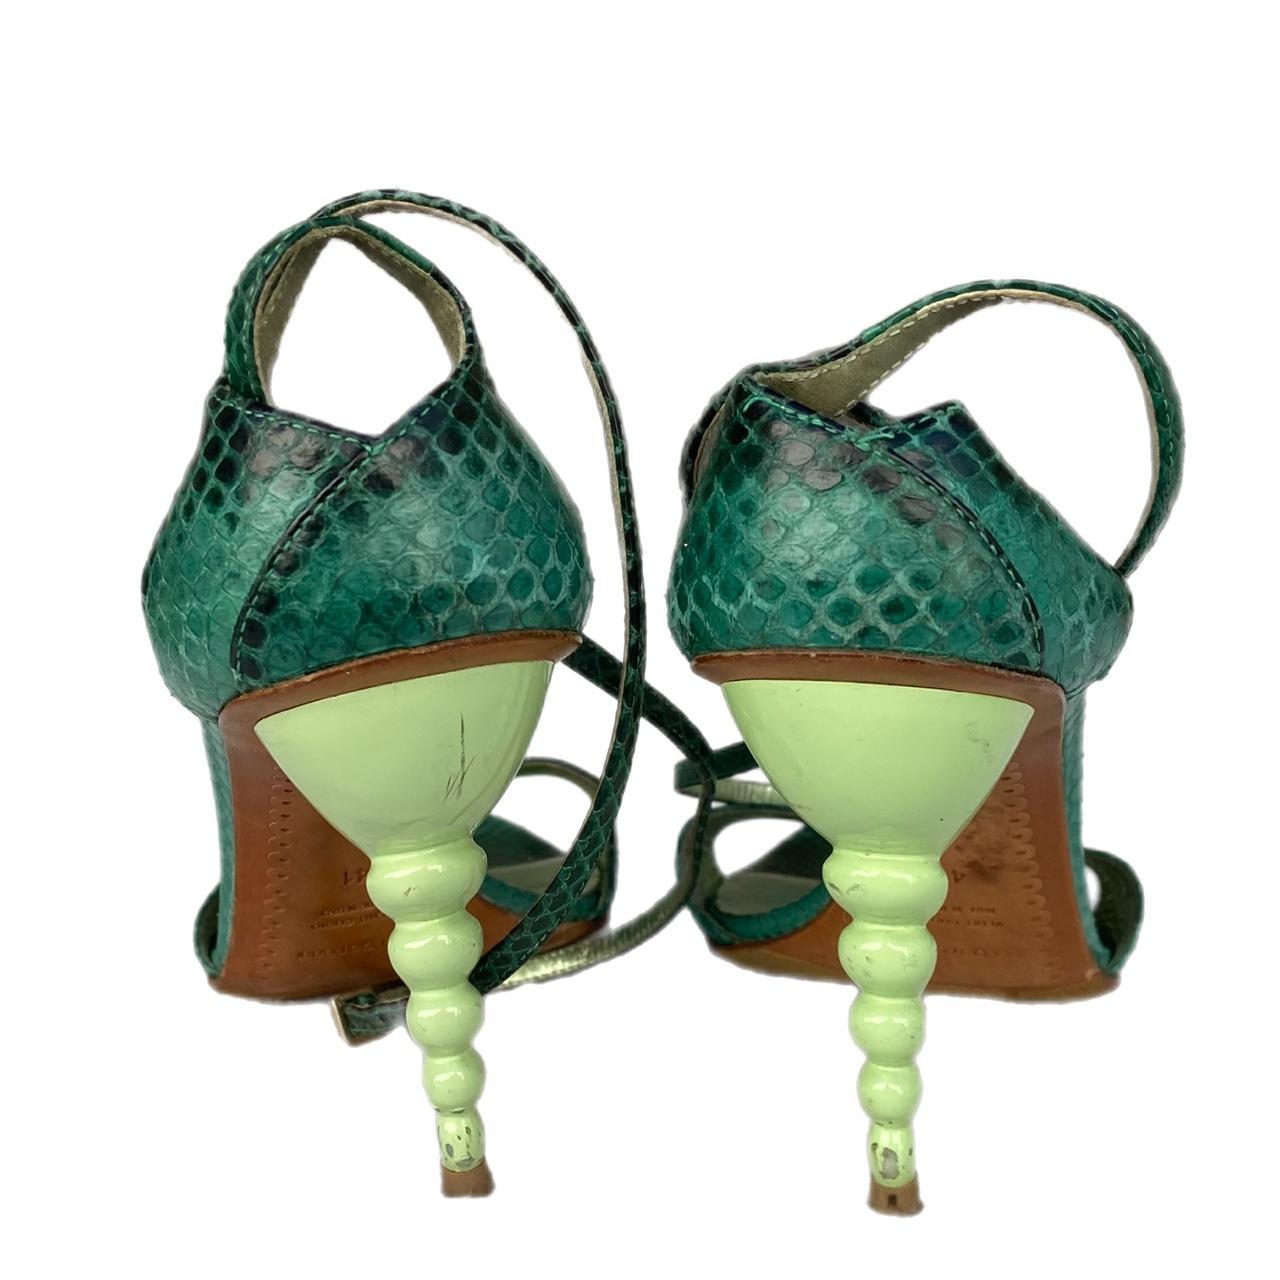 Sergio Rossi Women's Black and Green Sandals (3)